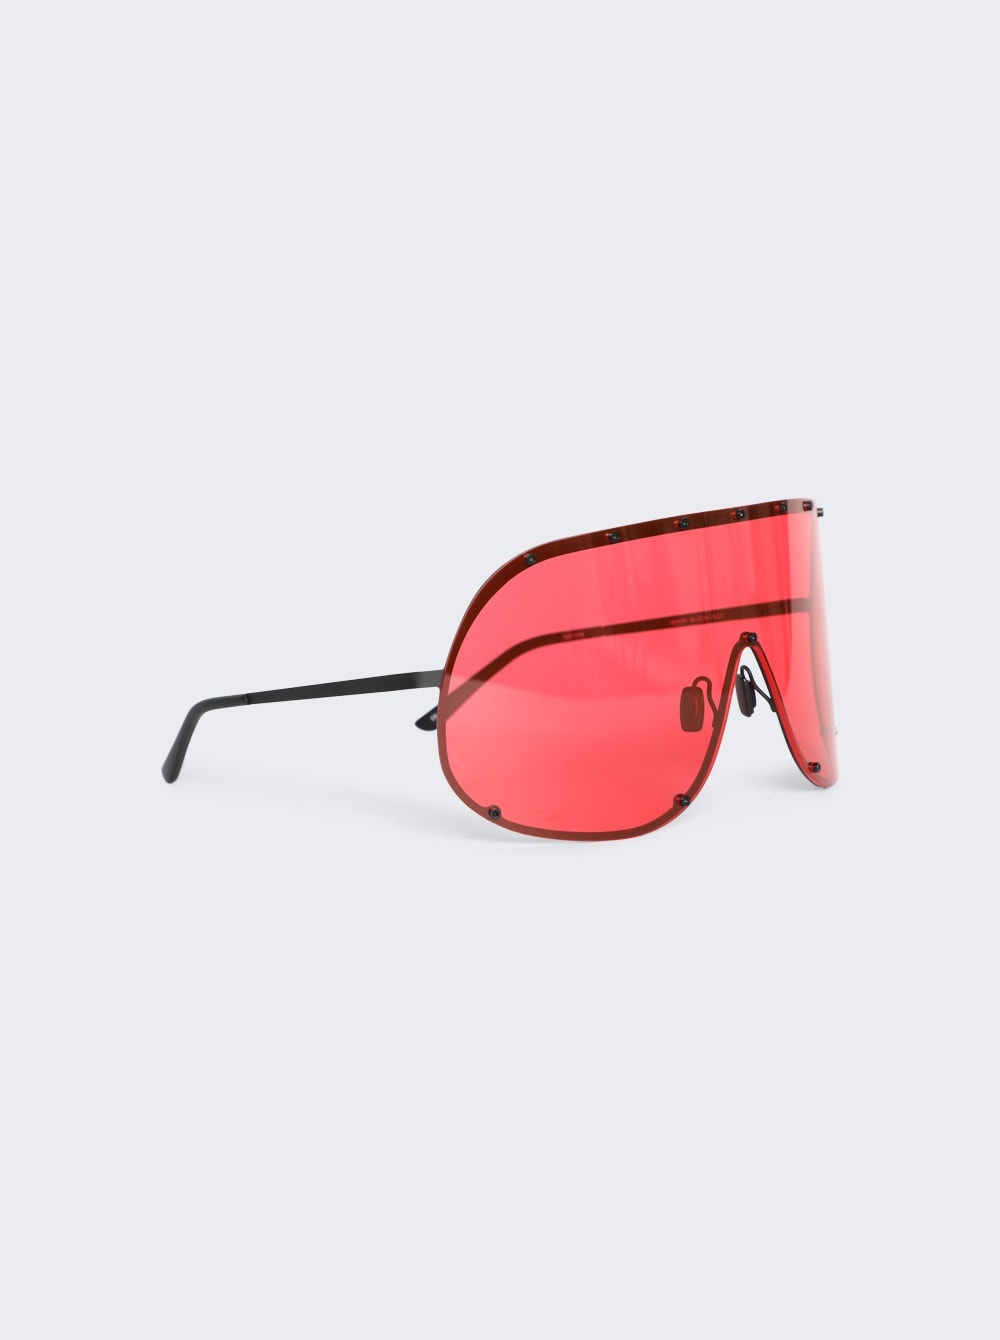 Shield Sunglasses Black And Red - 4